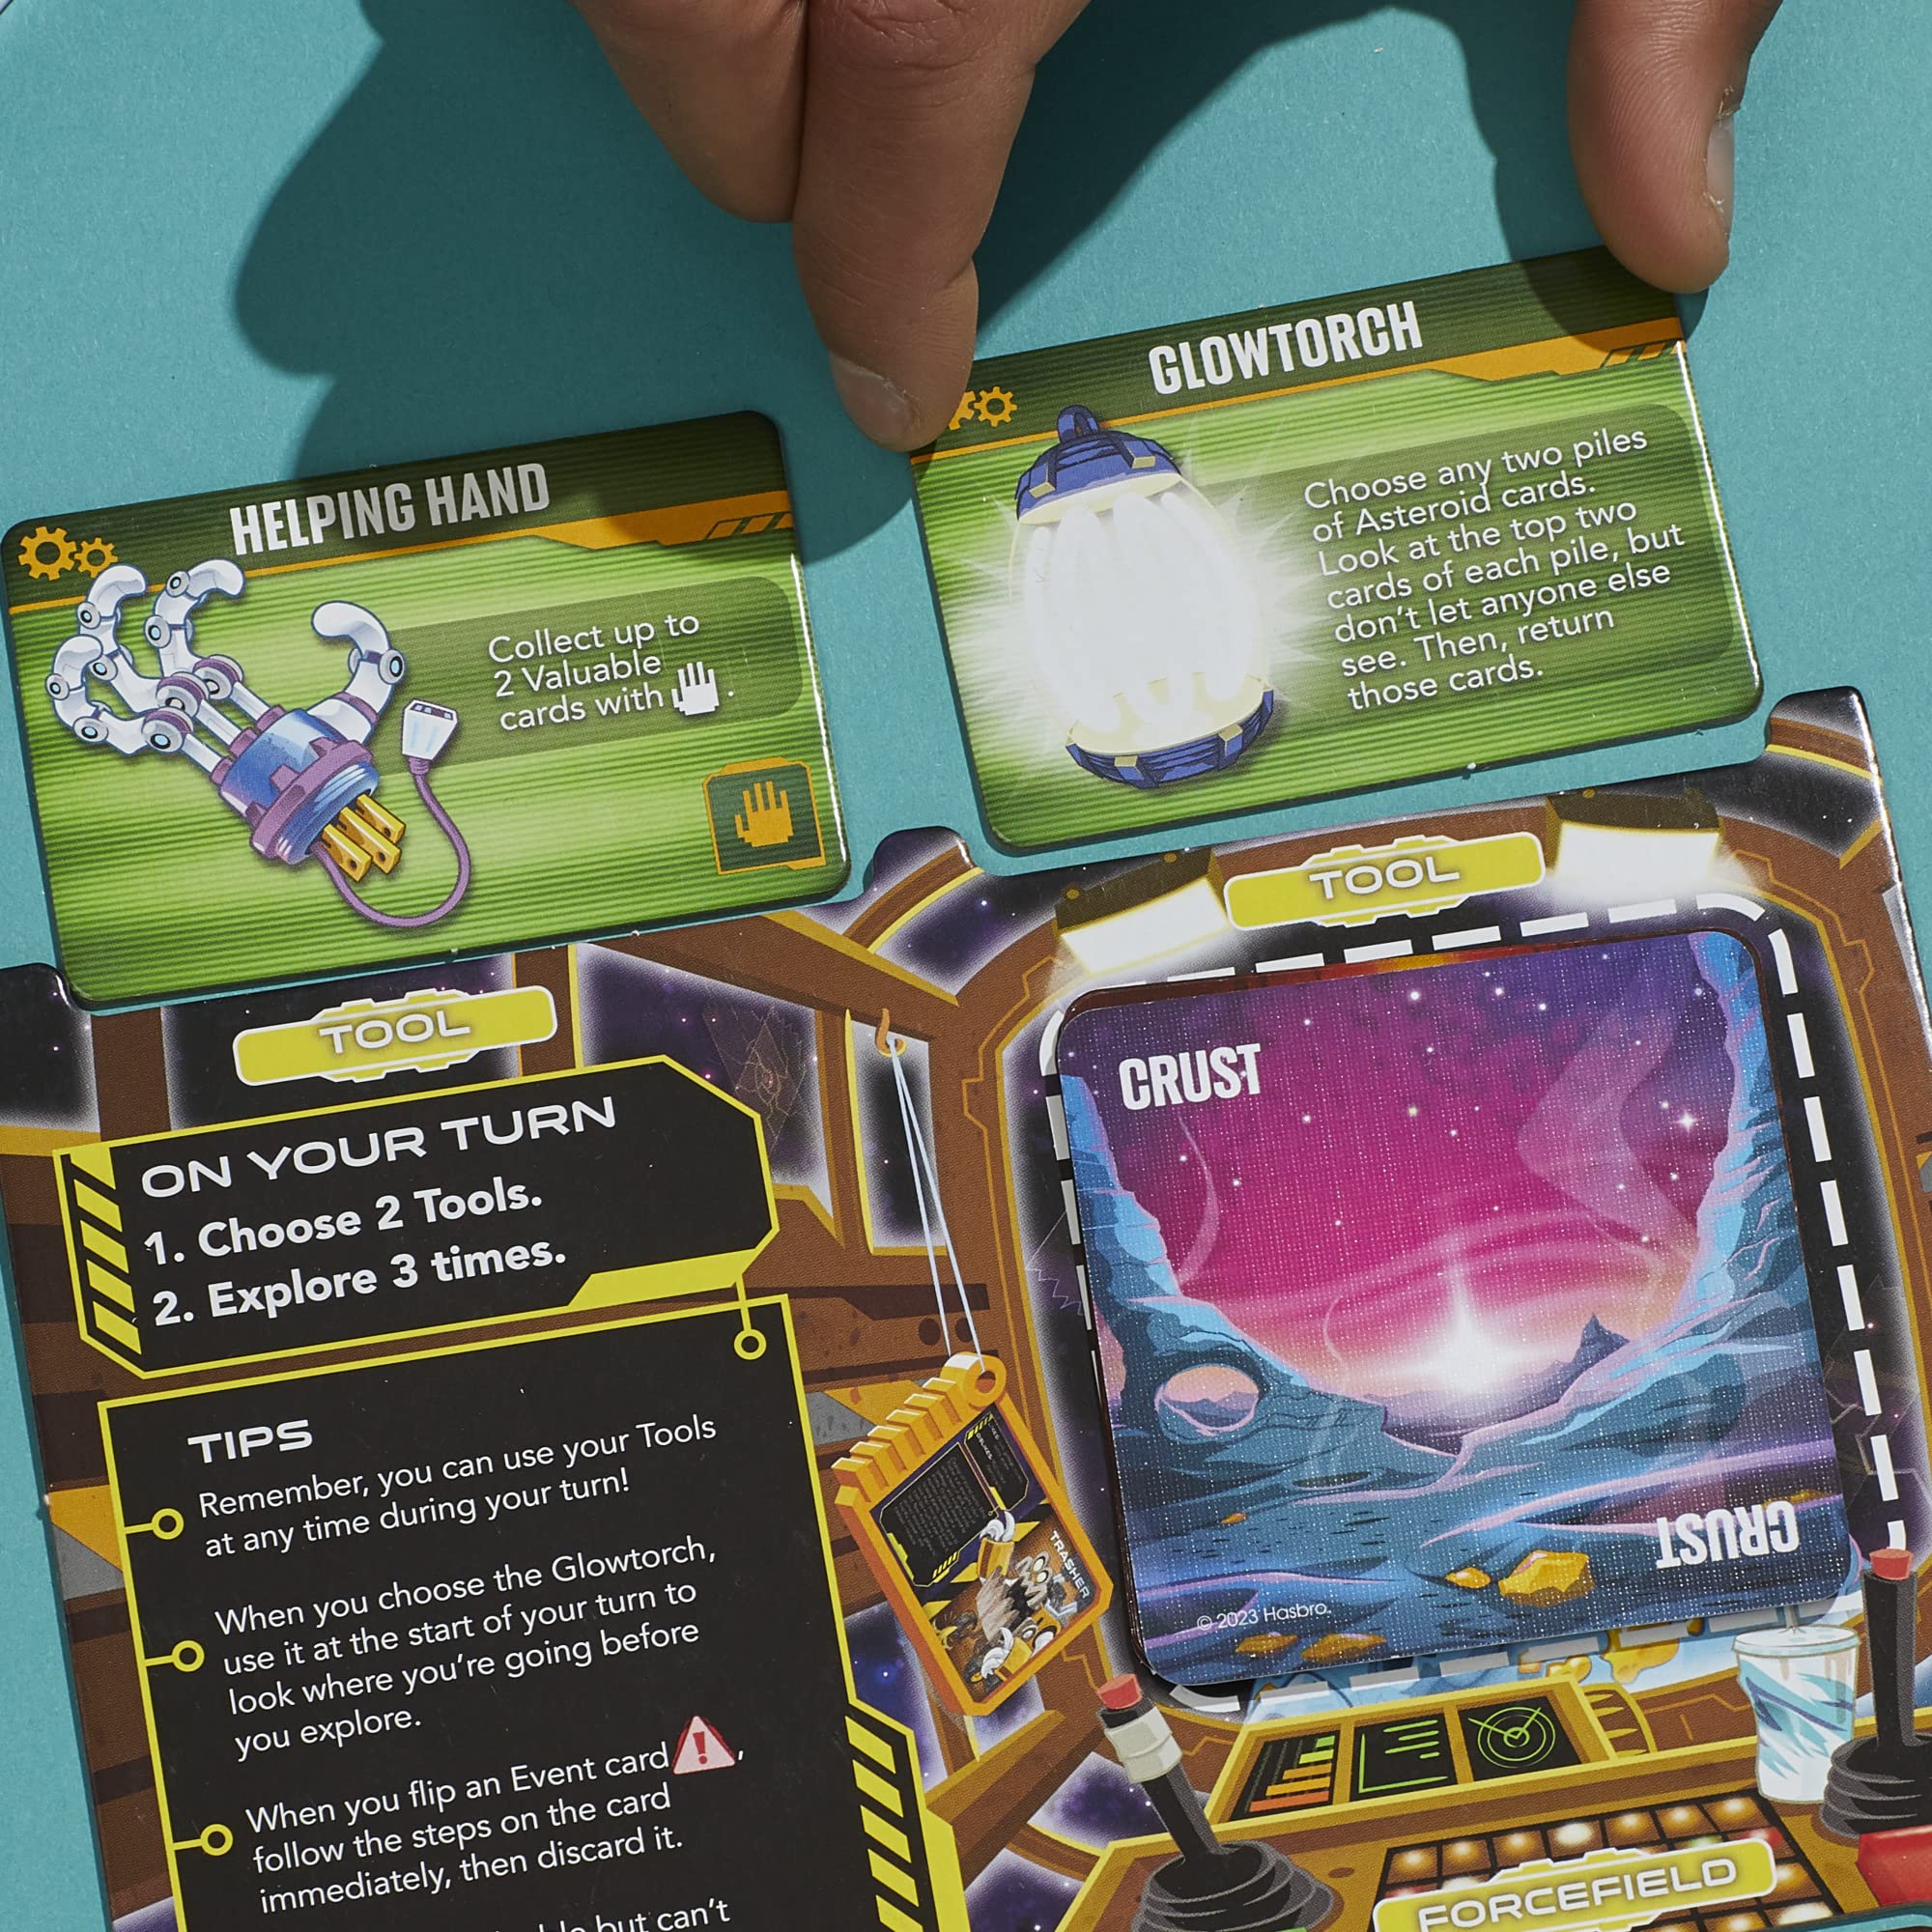 Galaxy Goldmine Game, Family Strategy Card Games for Kids Ages 10+, Teens, and Adults, 2-6 Players, Fun Family Card Games, Family-Friendly Party Games